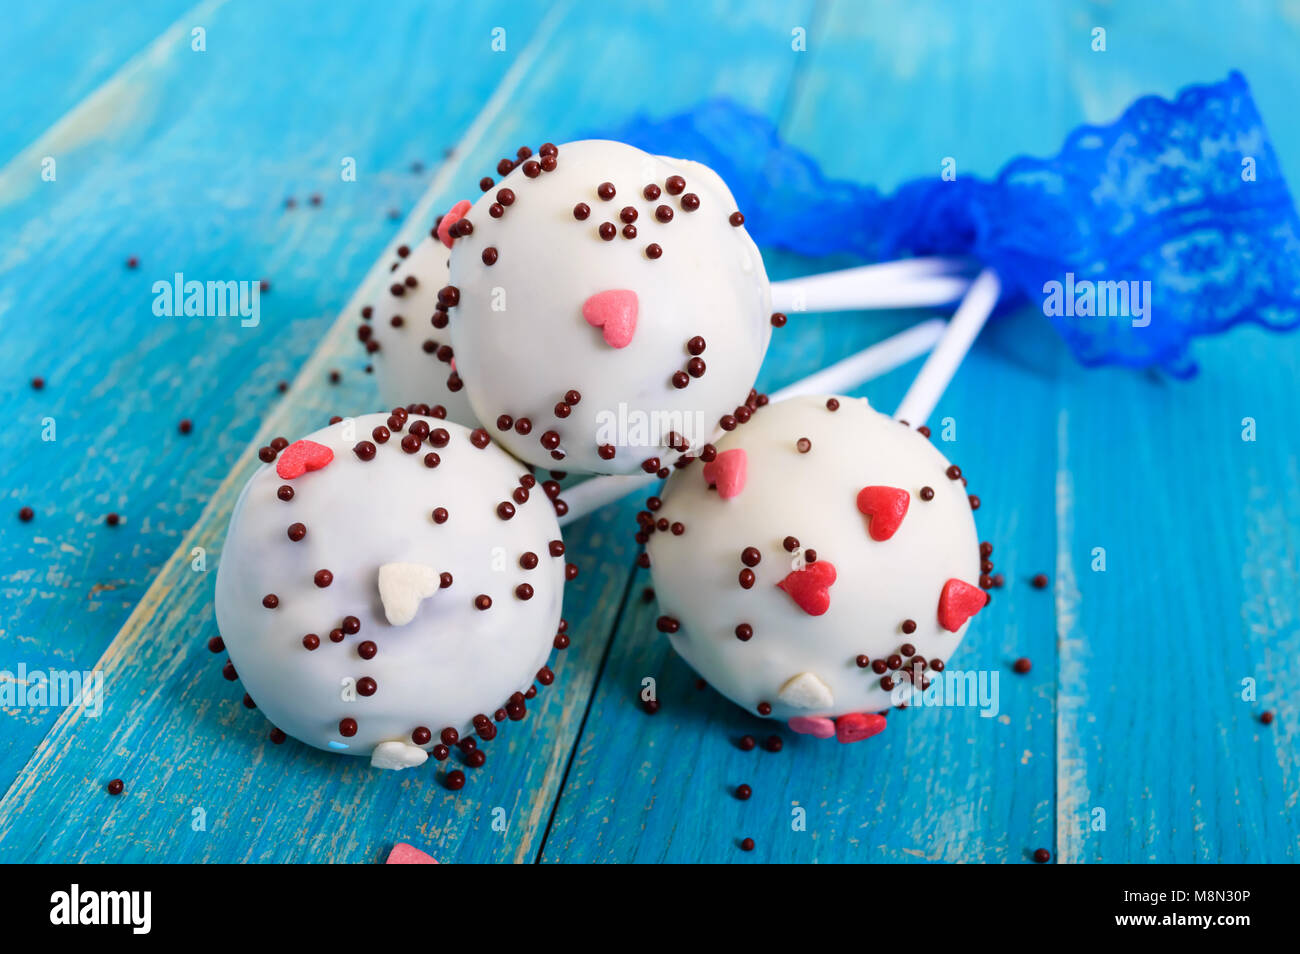 Holiday treats. Cake pops. Biscuit cakes in white chocolate glaze on a  bright blue wooden background Stock Photo - Alamy